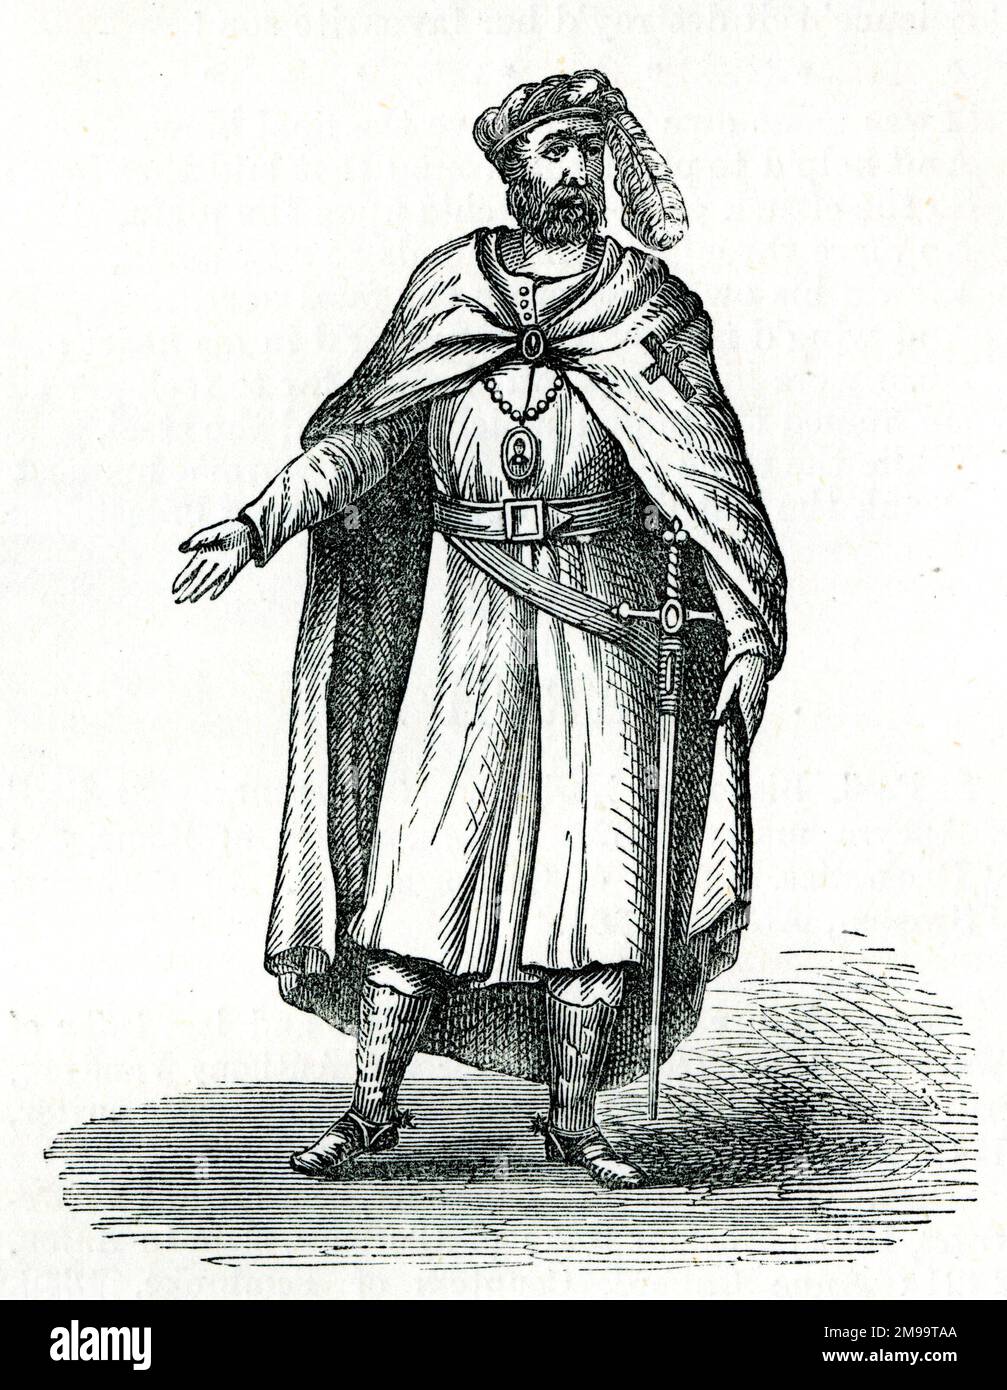 Circa 1270, The 23rd and Last Grand Master of the Knights Templar